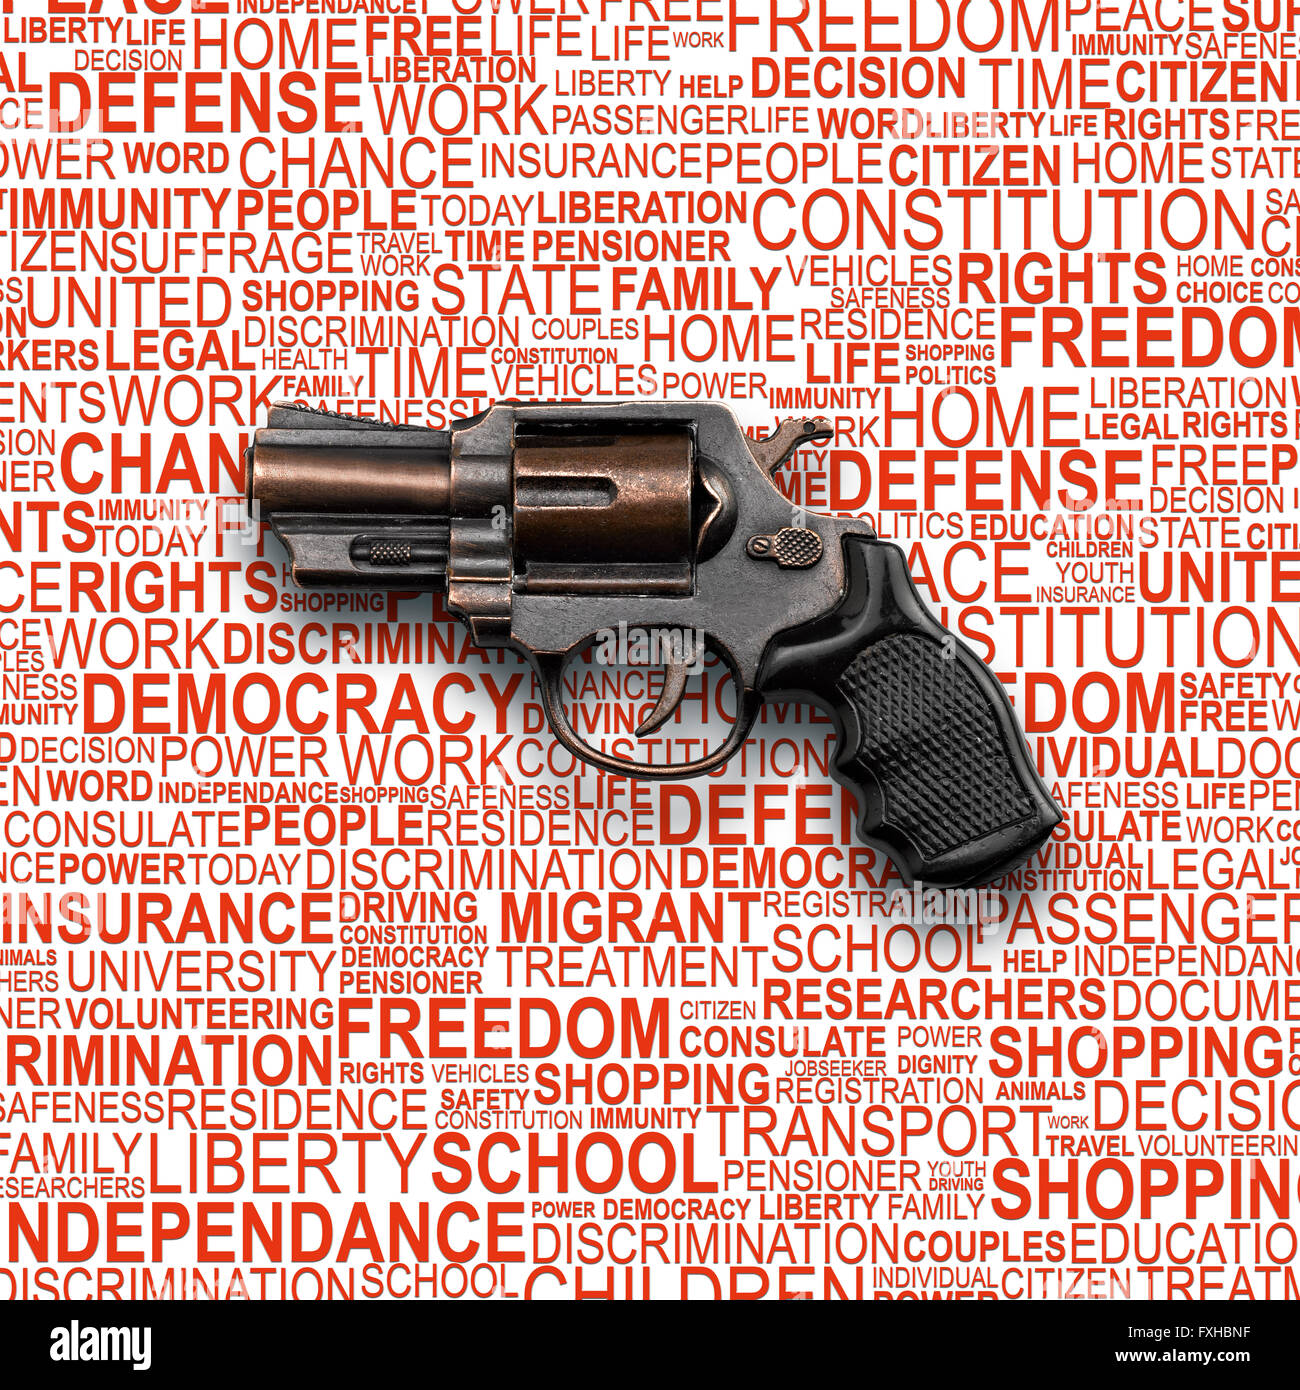 Revolver Gun, Toy For Children Stock Photo, Picture and Royalty Free Image.  Image 22036599.